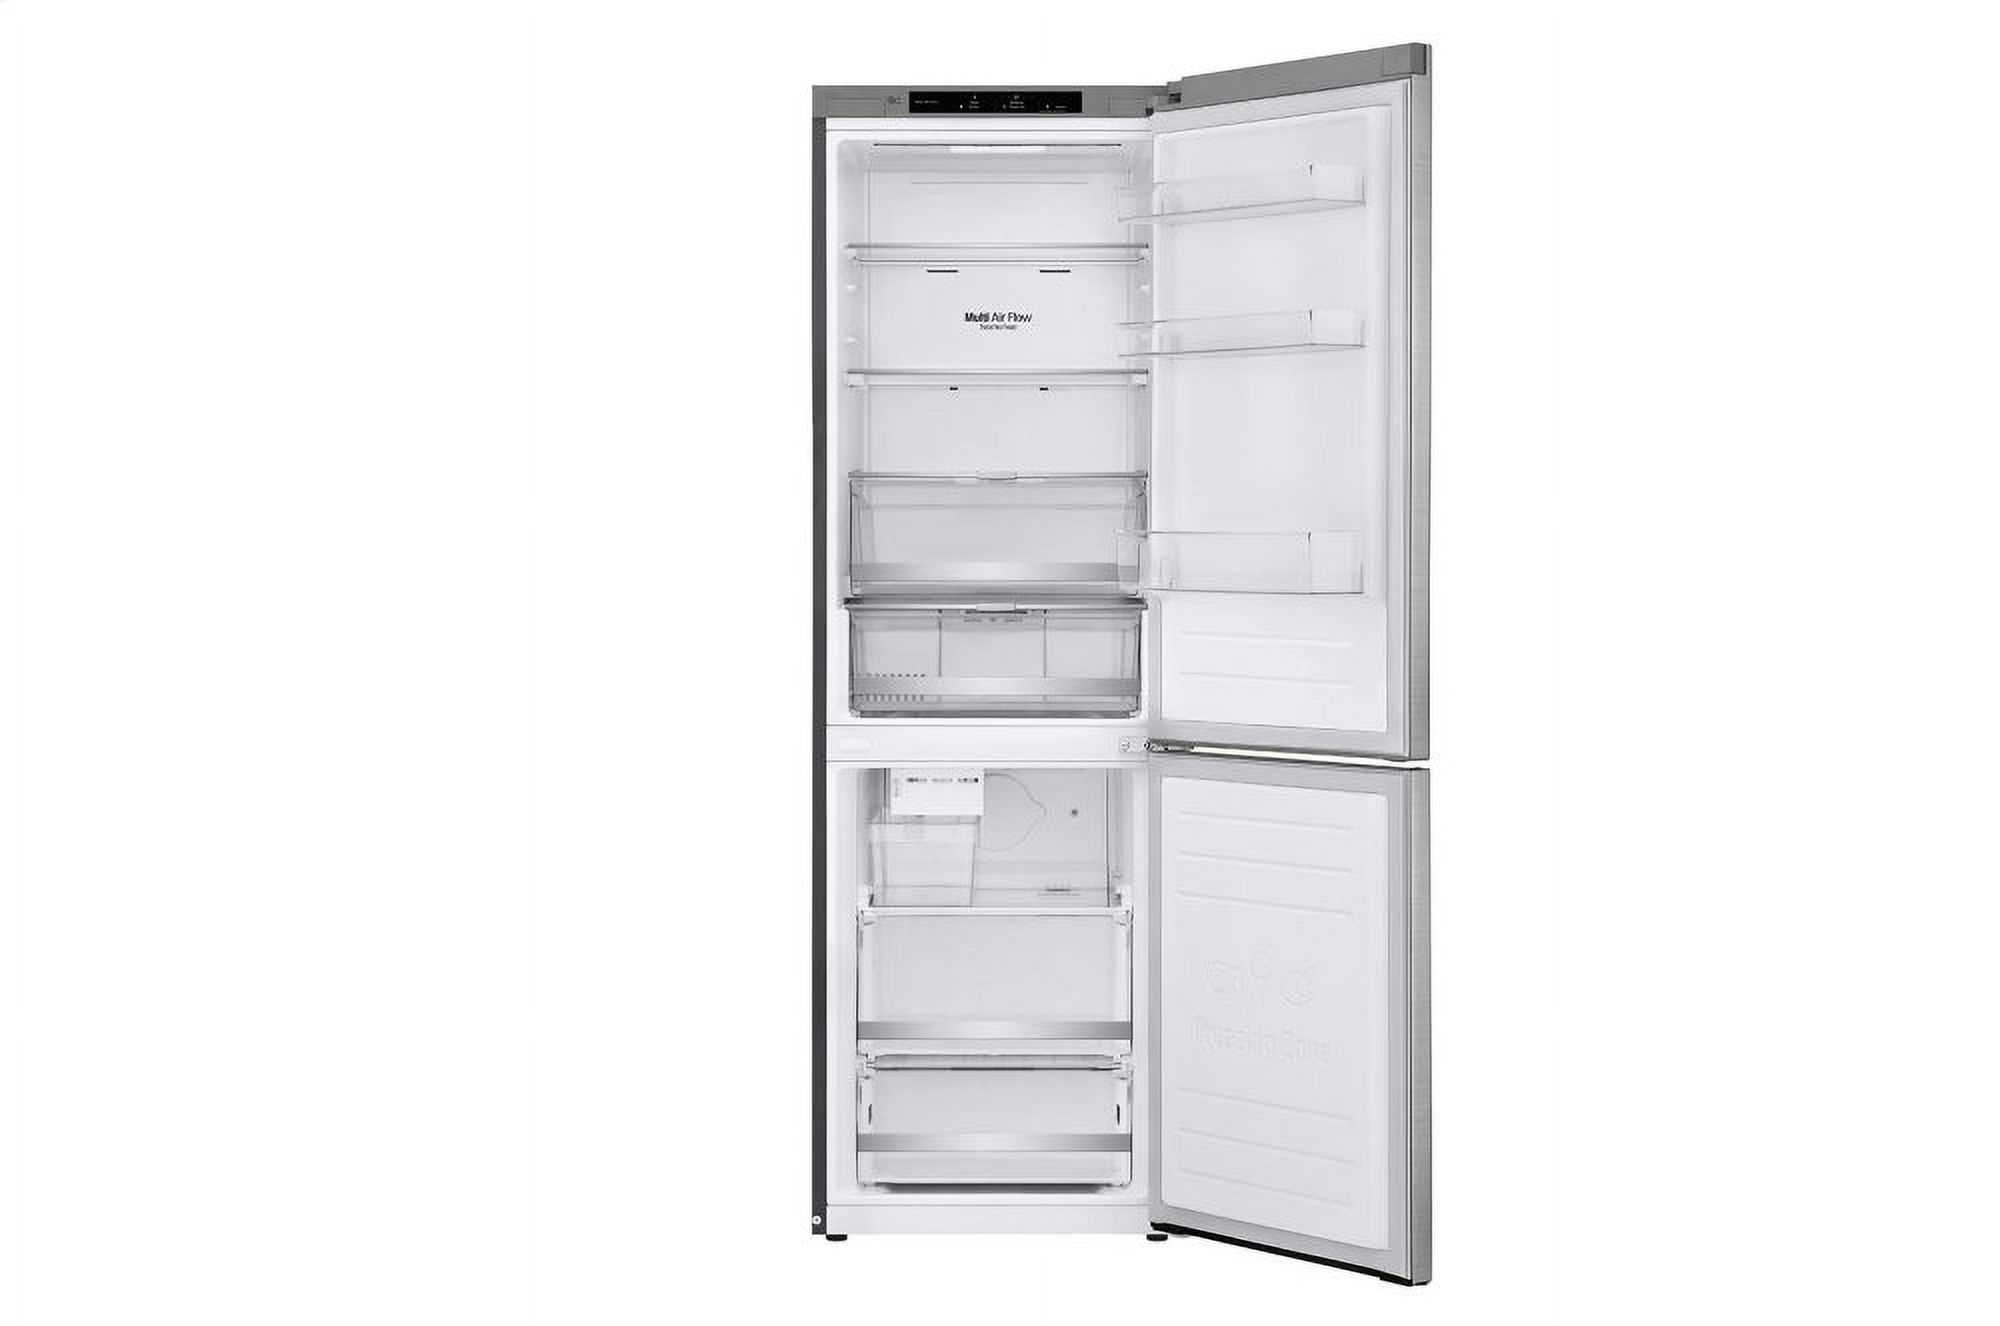 LG LRBCC1204S  BOTTOM FREEZER FREESTANDING REFRIGERATOR Stainless Steel - image 3 of 3